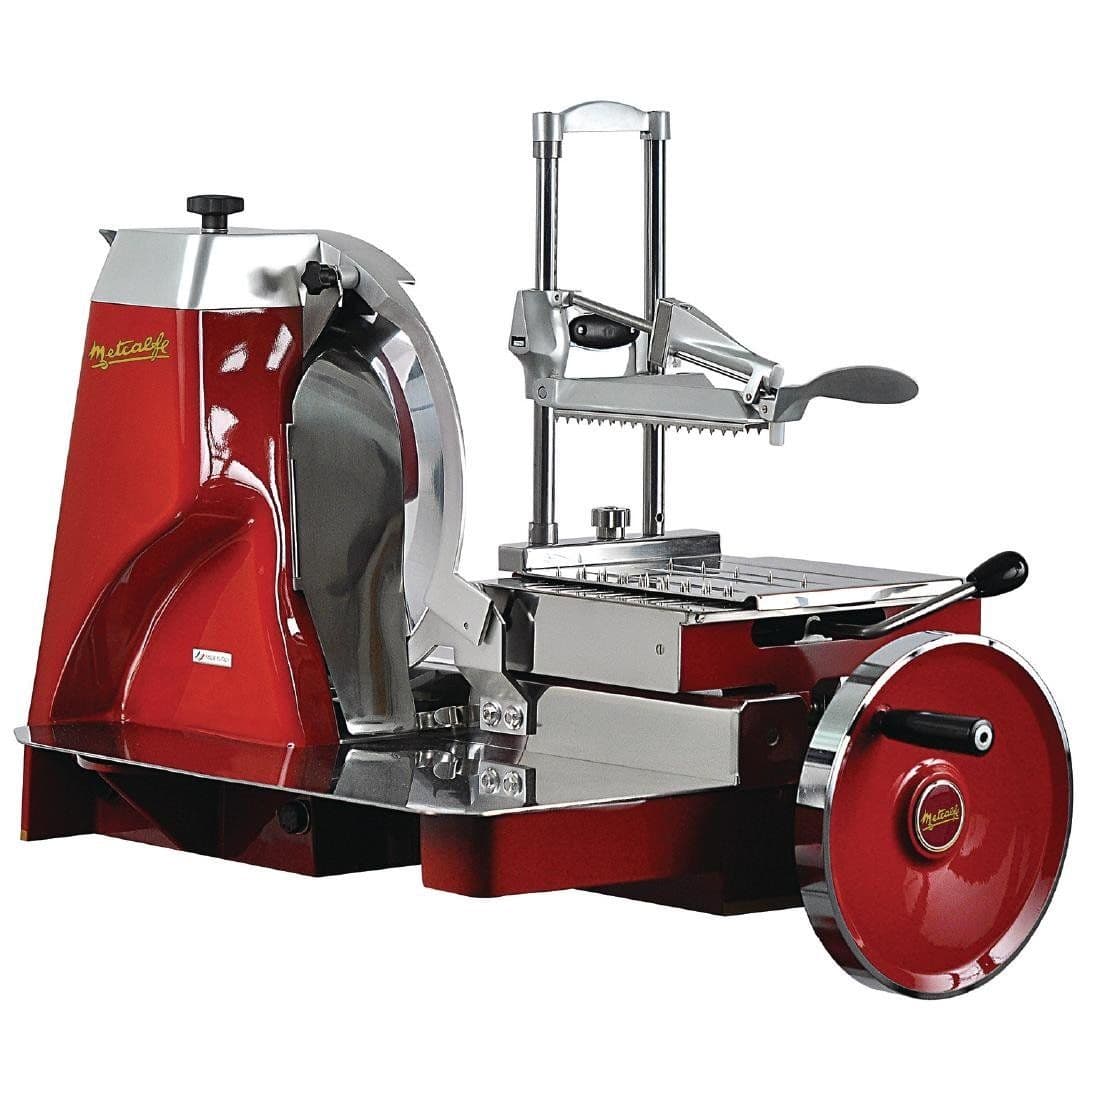 DC435 Metcalfe Retro Flywheel Automatic Meat Slicer RET370A JD Catering Equipment Solutions Ltd